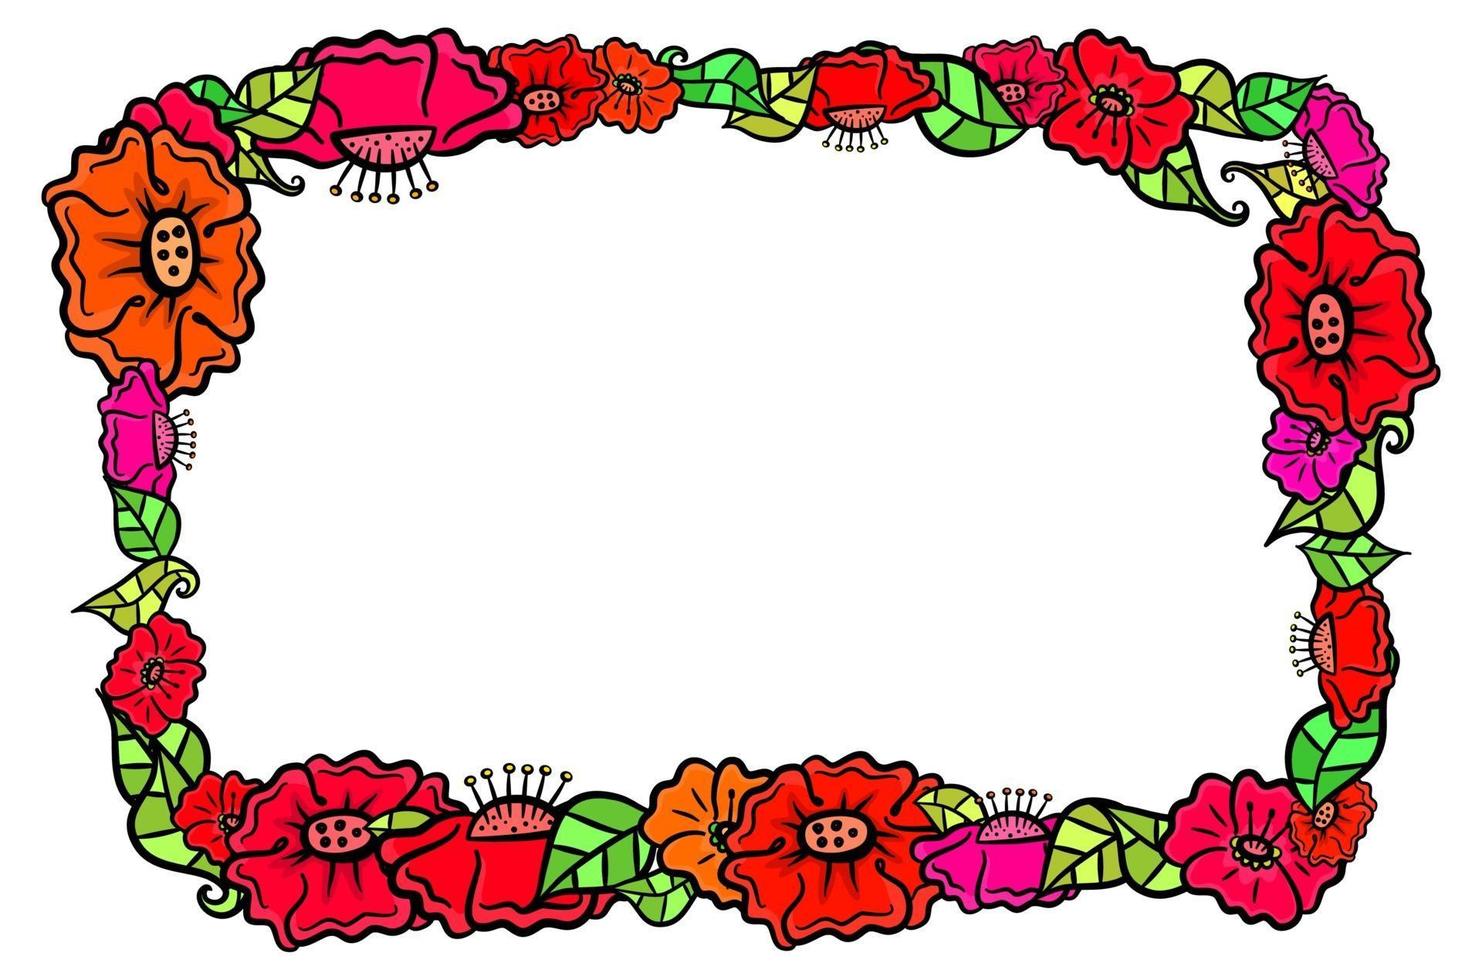 Floral Poppy Page Border Decoration vector